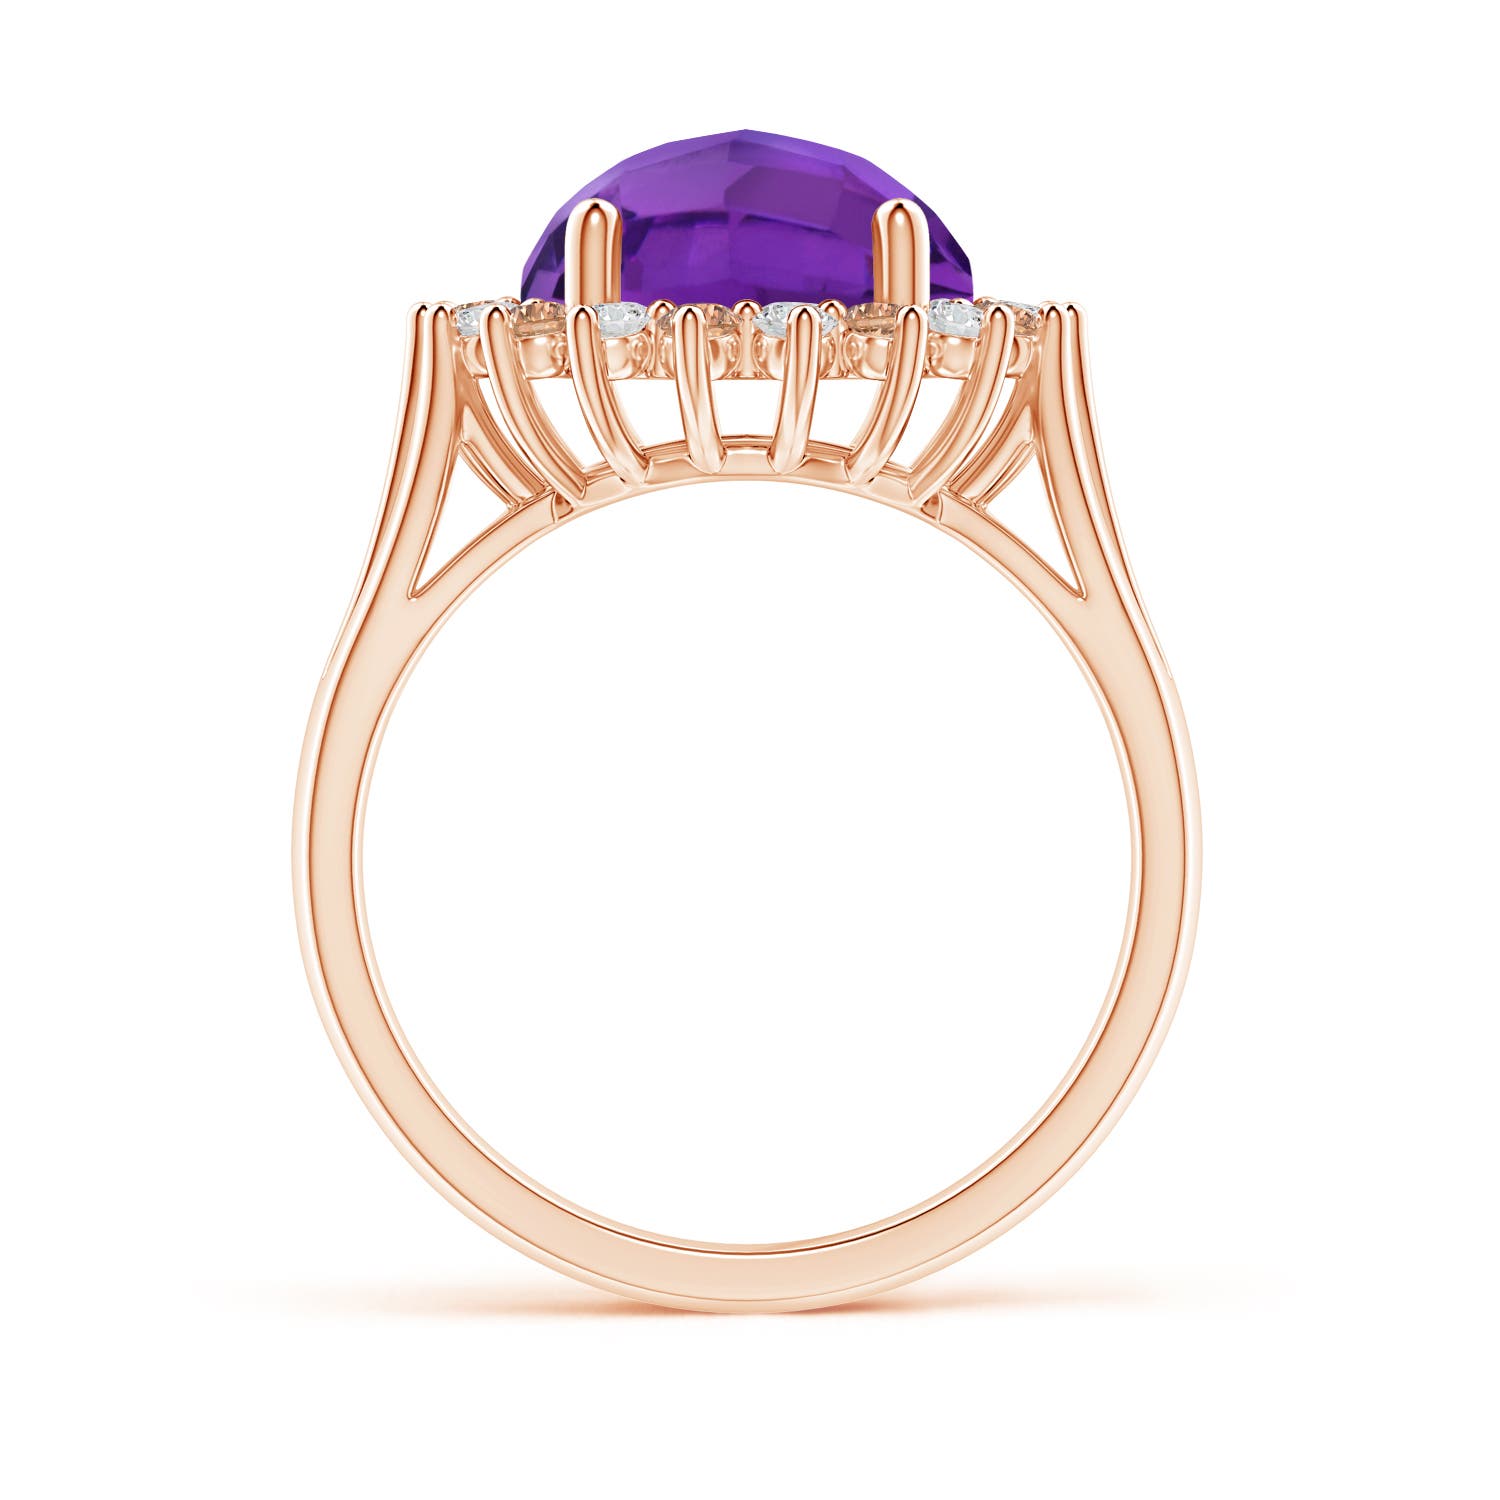 AAA - Amethyst / 4.17 CT / 14 KT Rose Gold